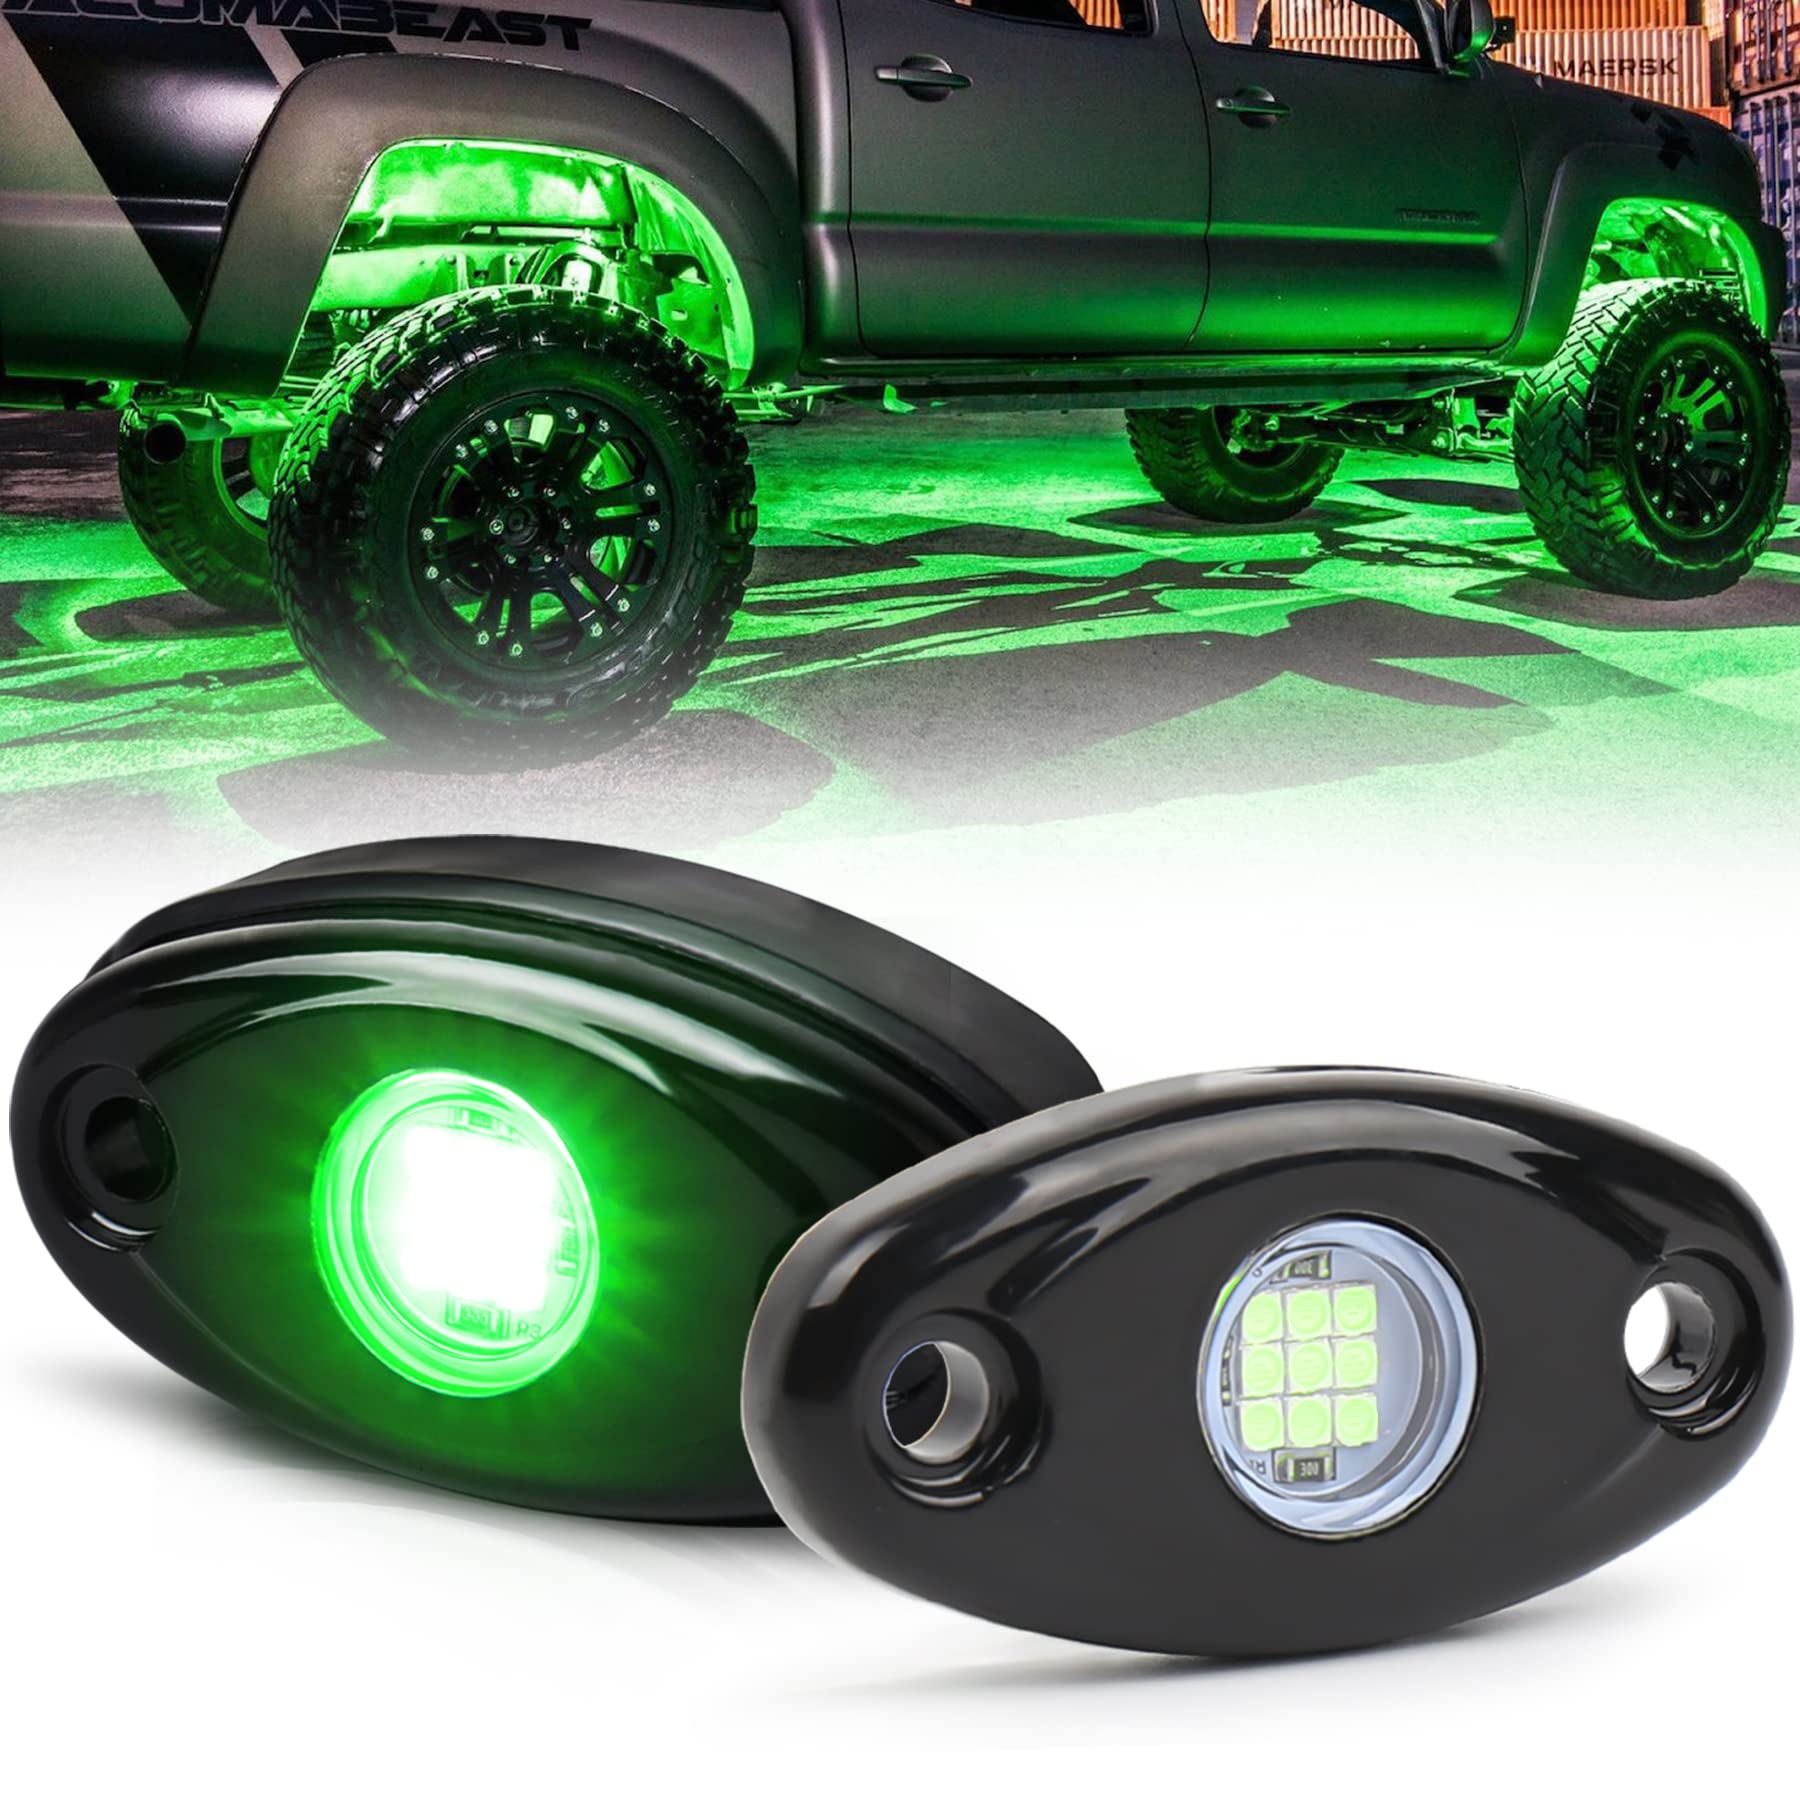 2 Pods LED Rock Lights, MOVOTOR Green Off Road Rock Lights Waterproof IP68 Underglow Light Kit Compatible with Truck Pickups Cars ATV UTV SUV Motorcycle Boat